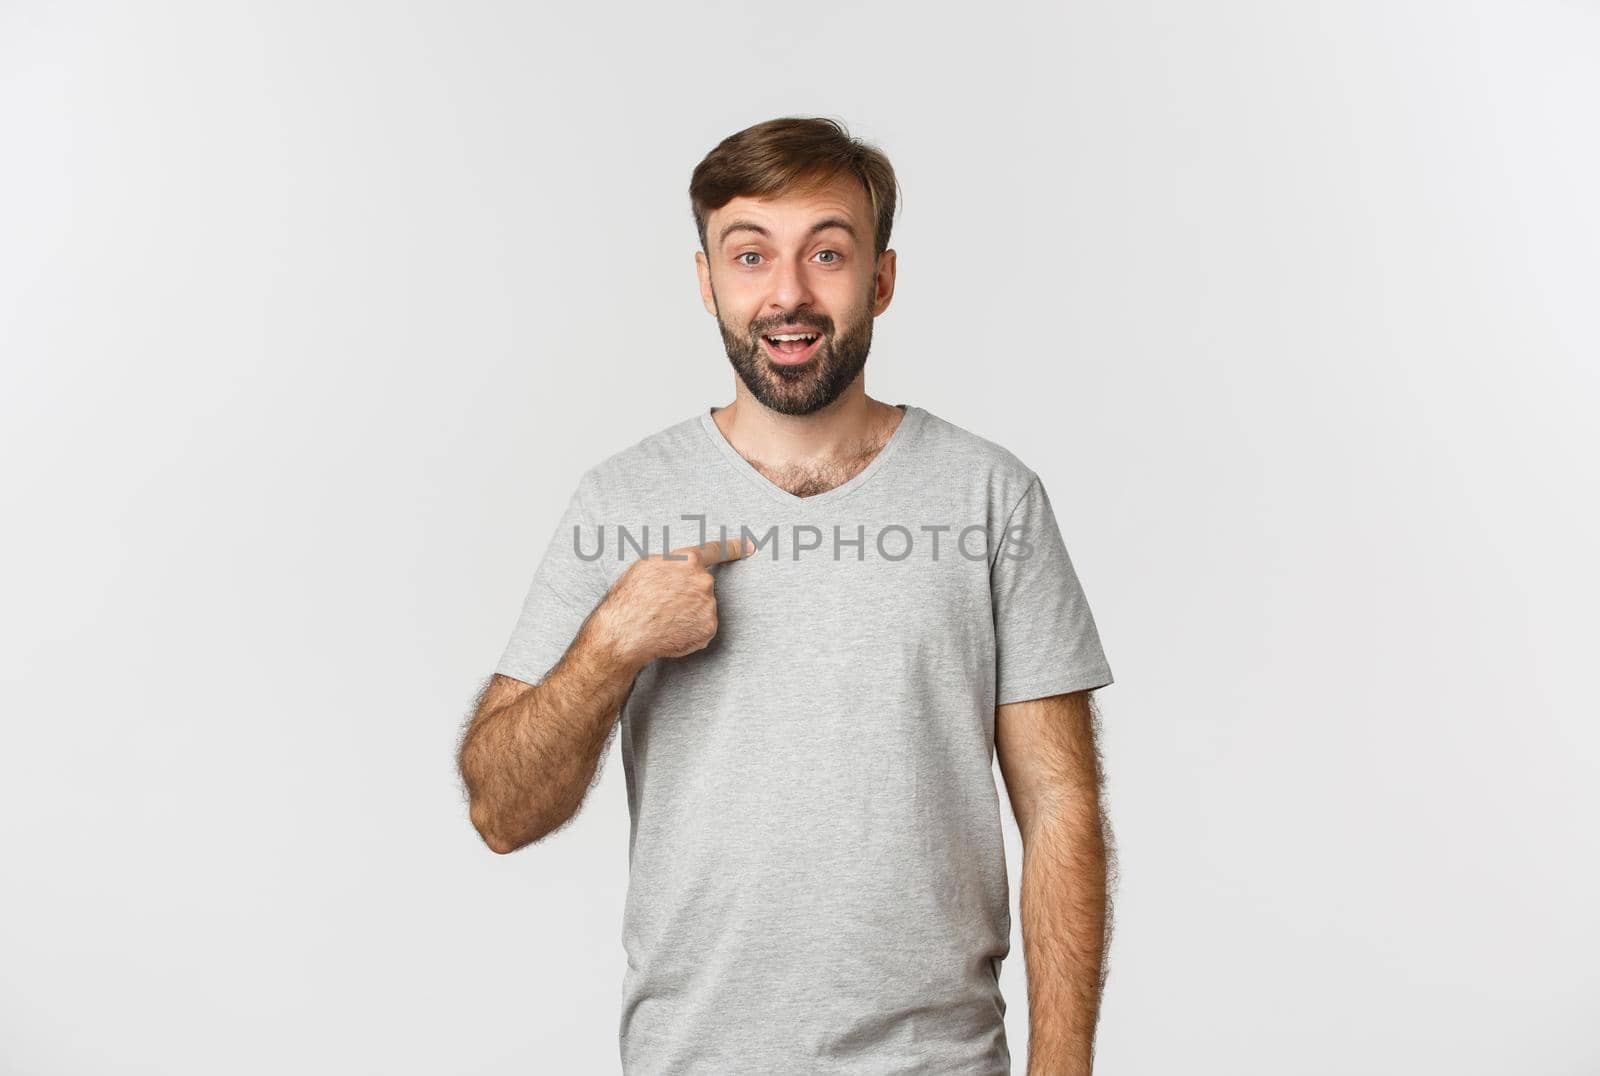 Image of happy and surprised man in gray t-shirt, pointing at himself, standing over white background.